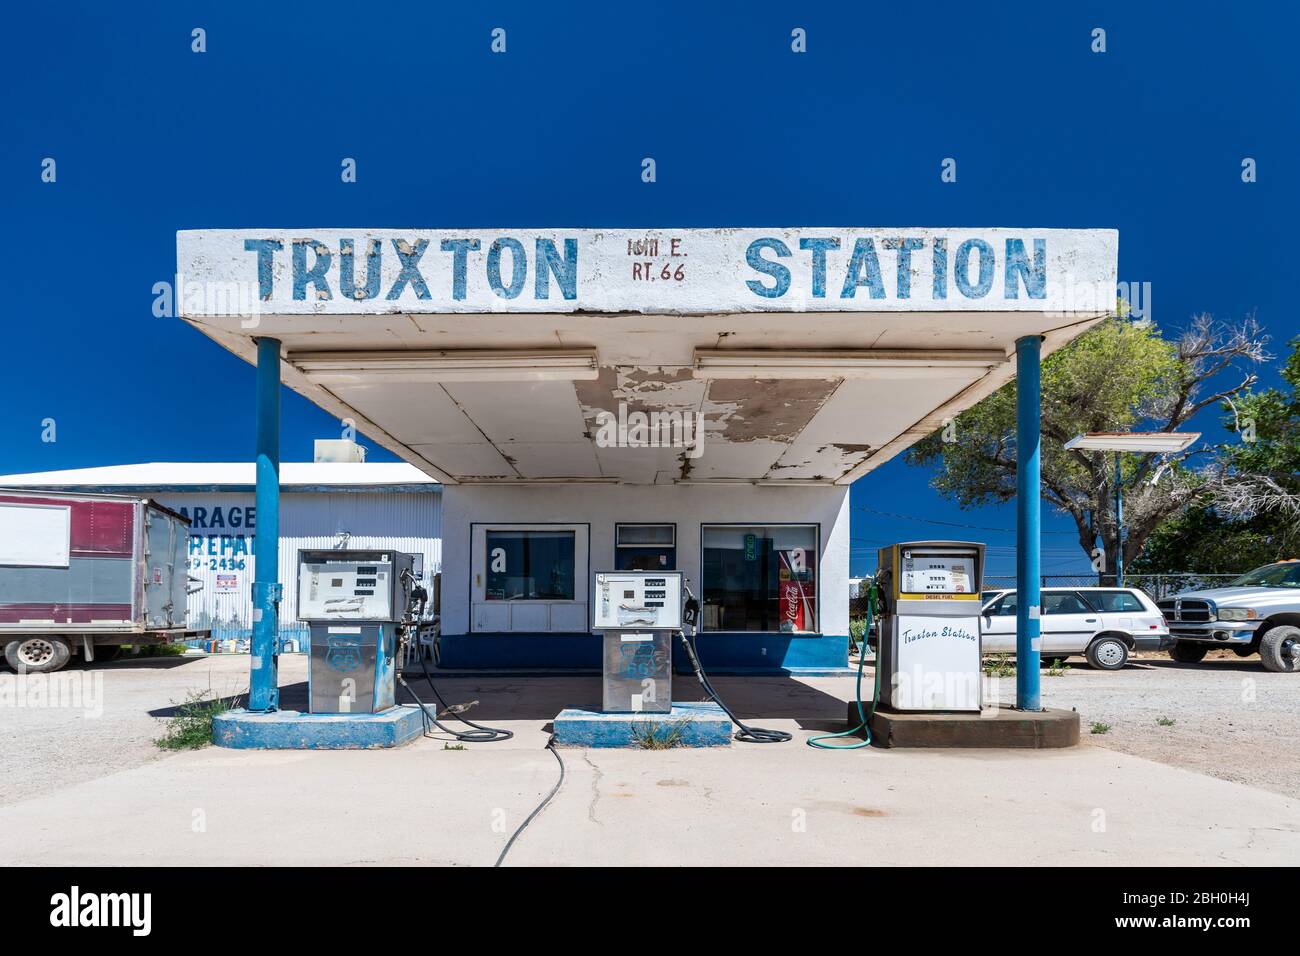 Symmetrical wide angle shot of an iconic vintage fuel station in Seligman, Arizona, under a summer blue sky Stock Photo